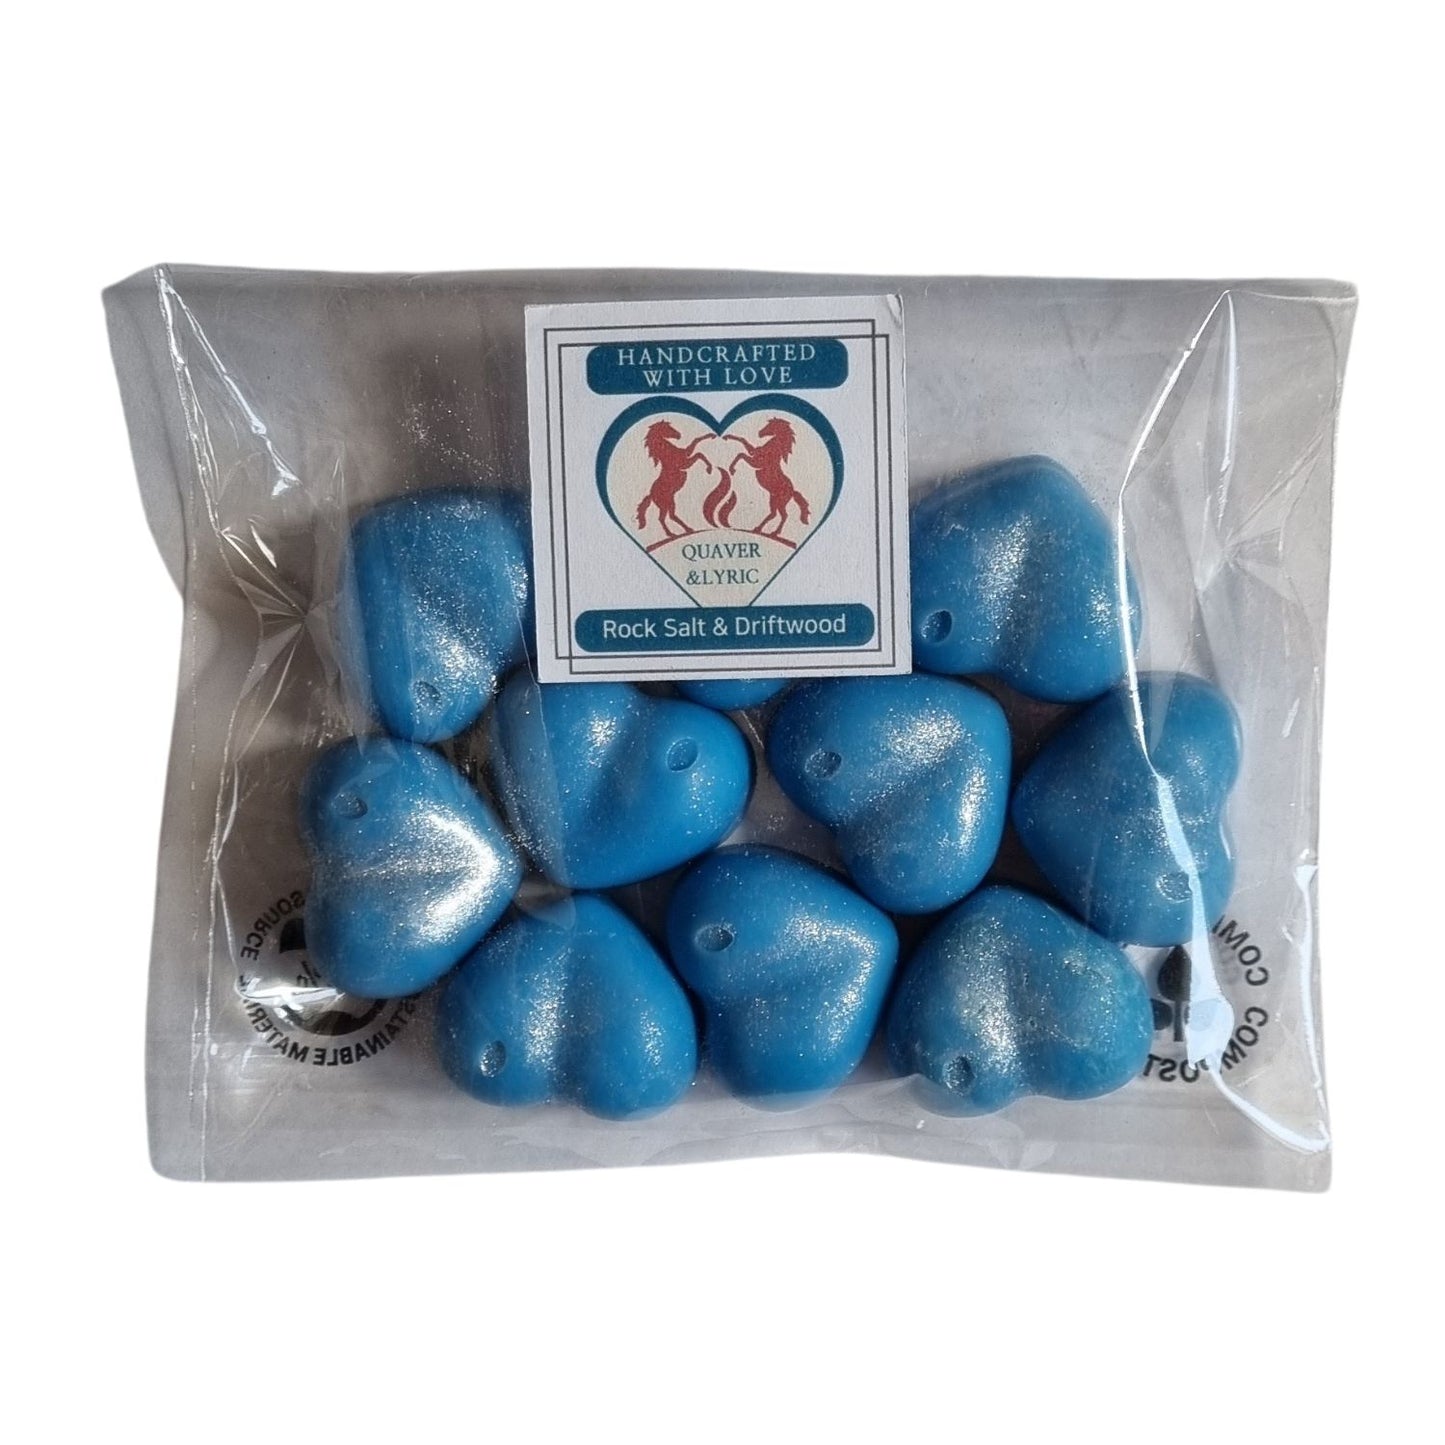 ten ocean blue heart shaped soy wax melts in a packet with Quaver and Lyric branding